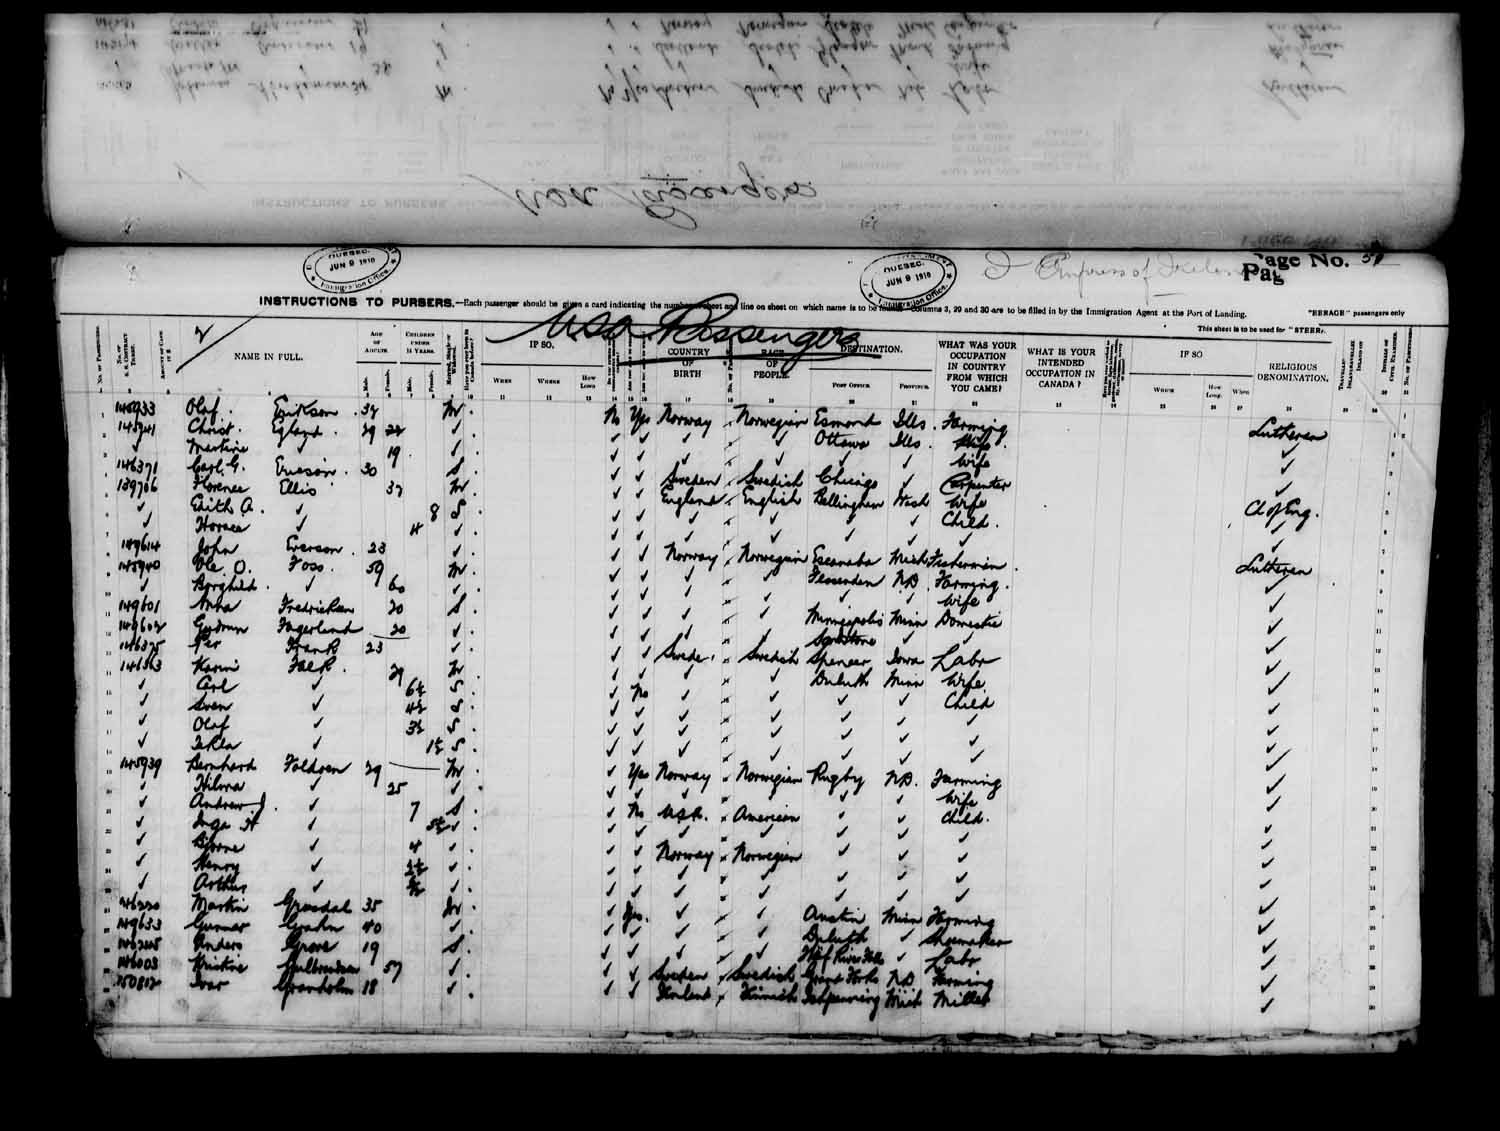 Digitized page of Quebec Passenger Lists for Image No.: e003562760